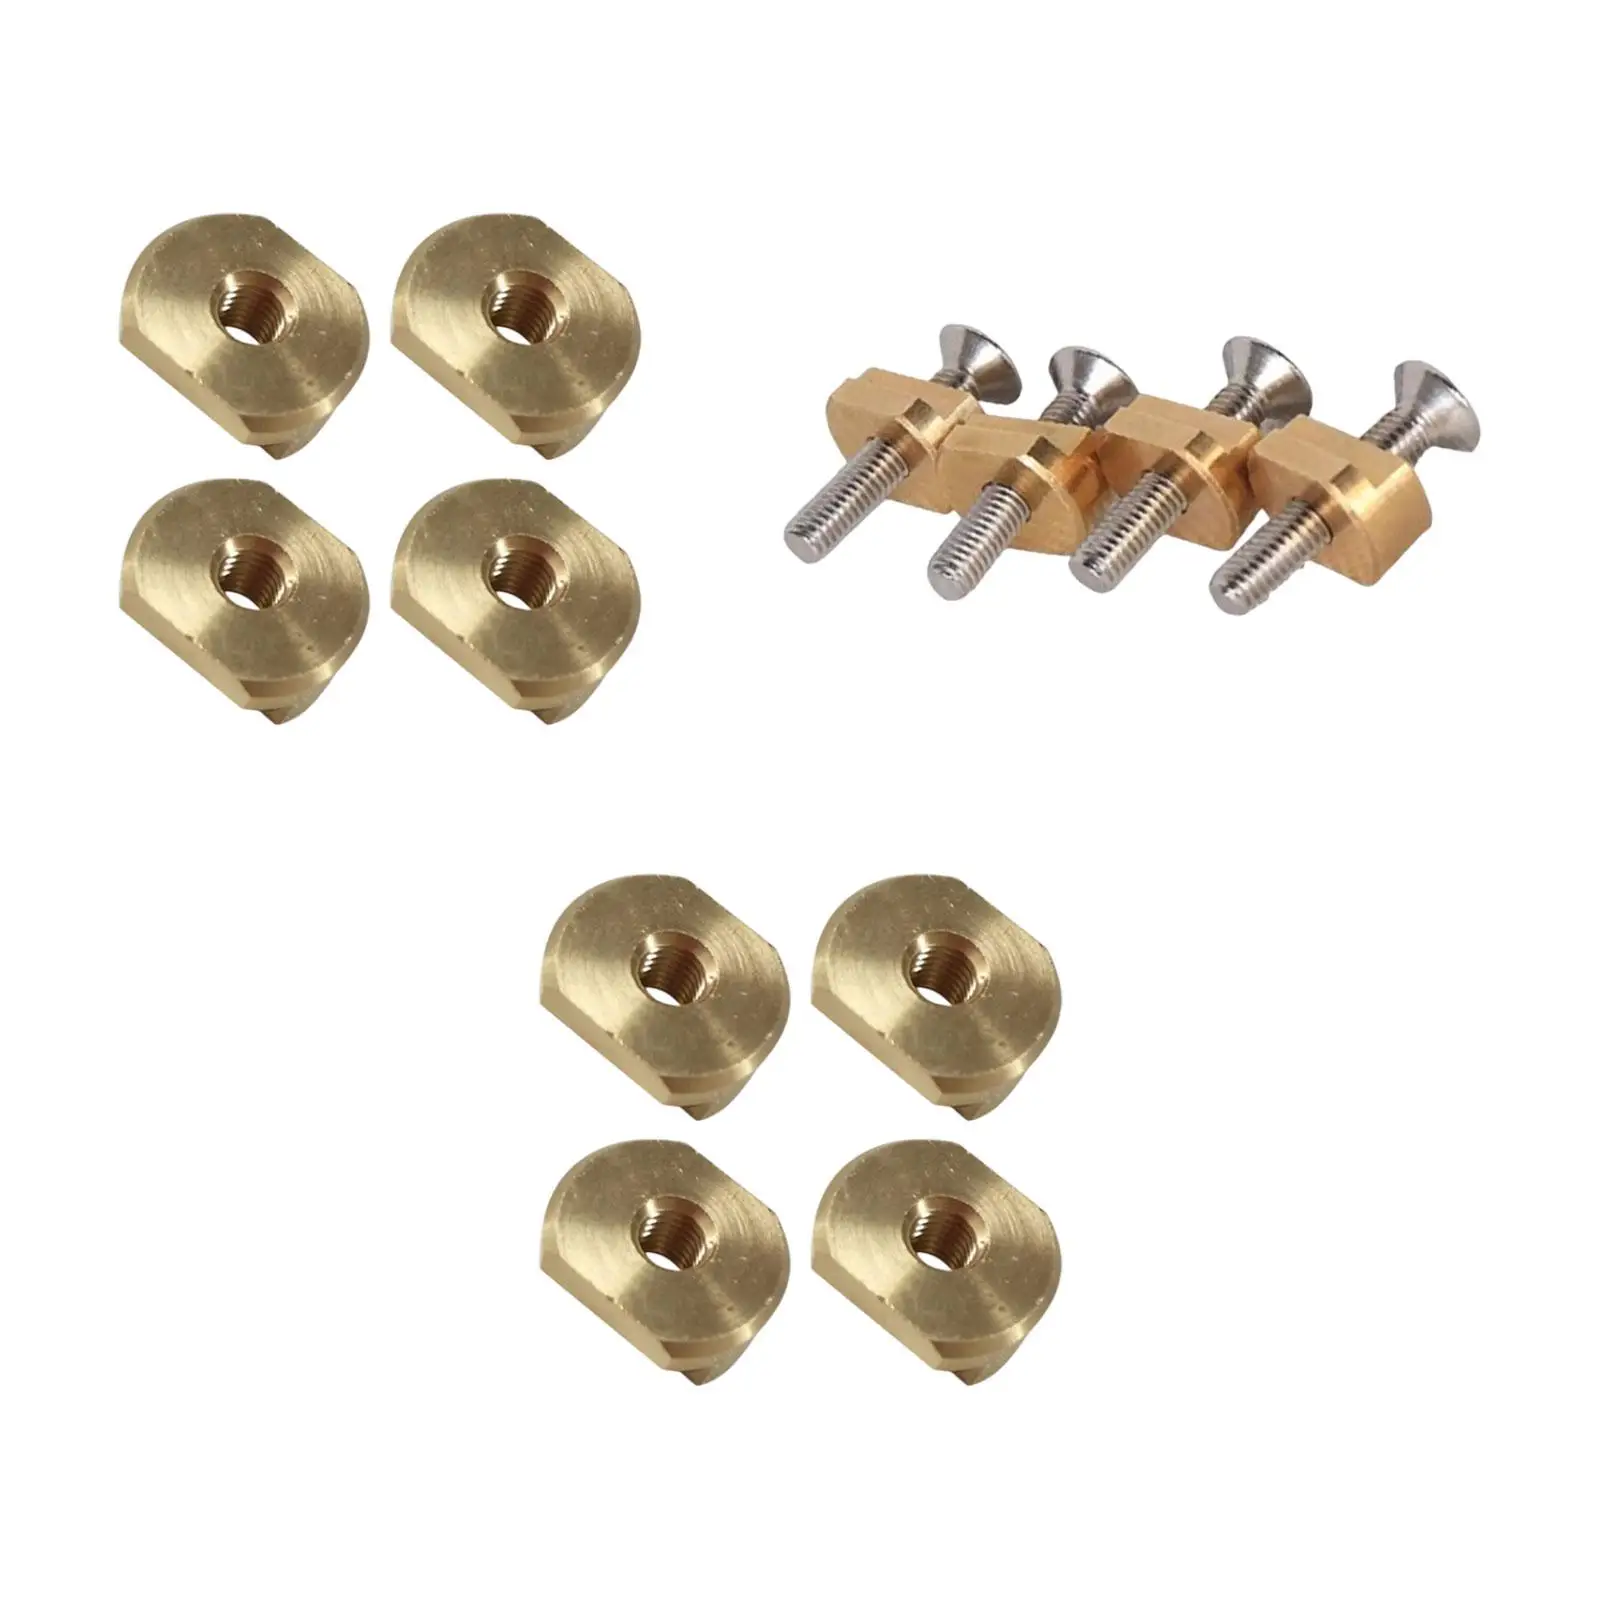 

Hydrofoil Mounting T Nuts Multifunction High Strength Stable Manual Tool Durable Copper for Hydrofoil Tracks Surfboard Fittings